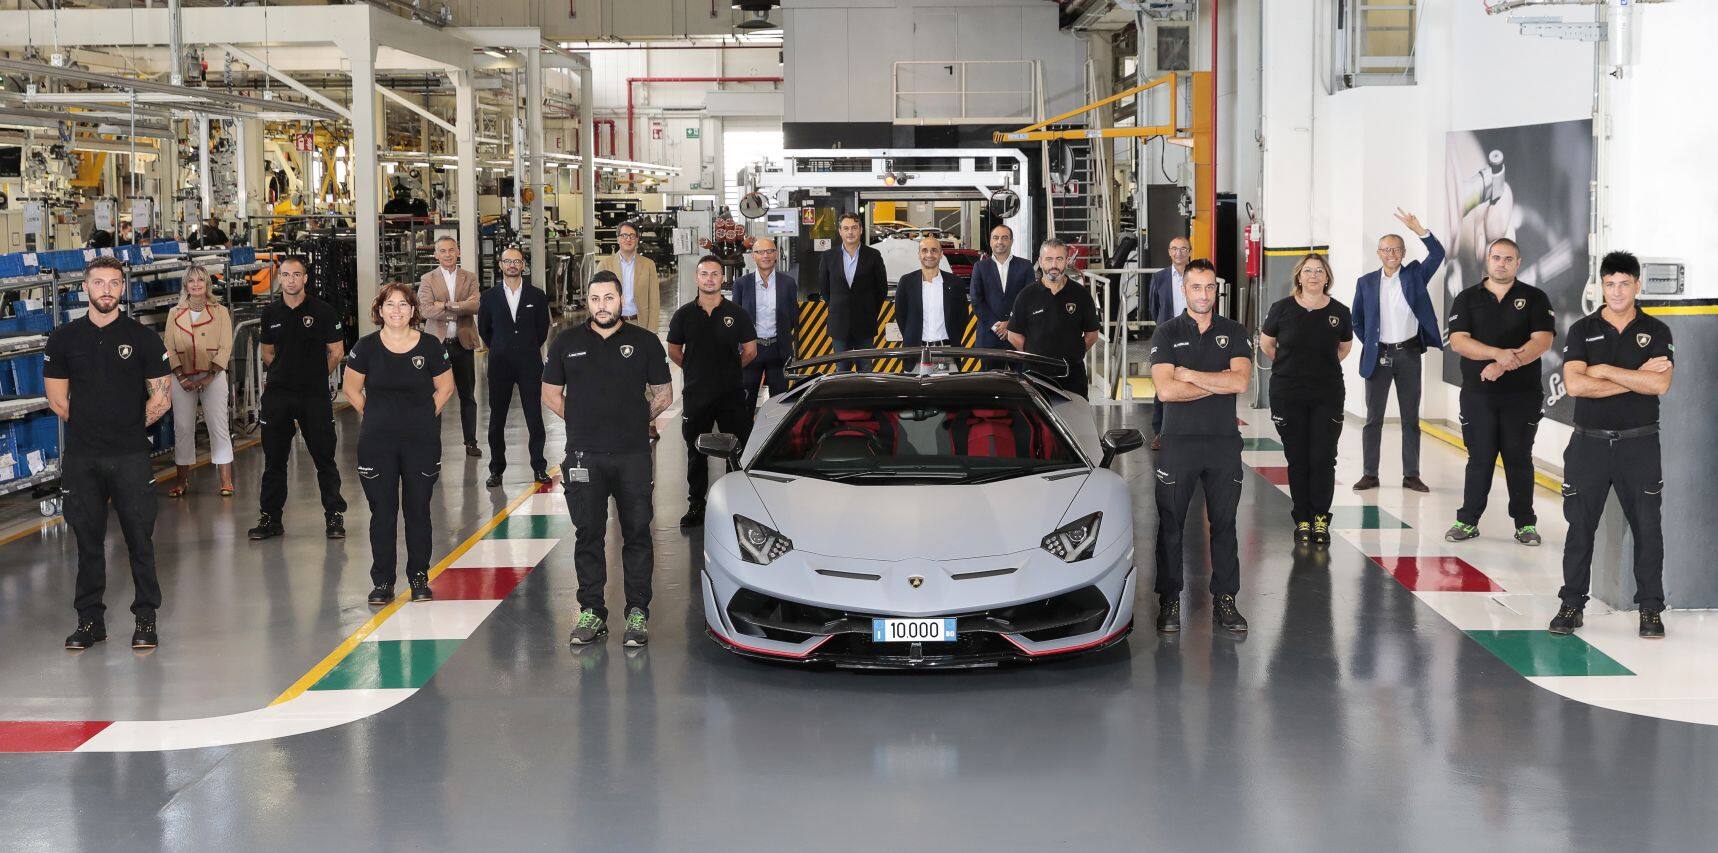 Nine years of Lamborghini Aventador: A look at its journey as the ...